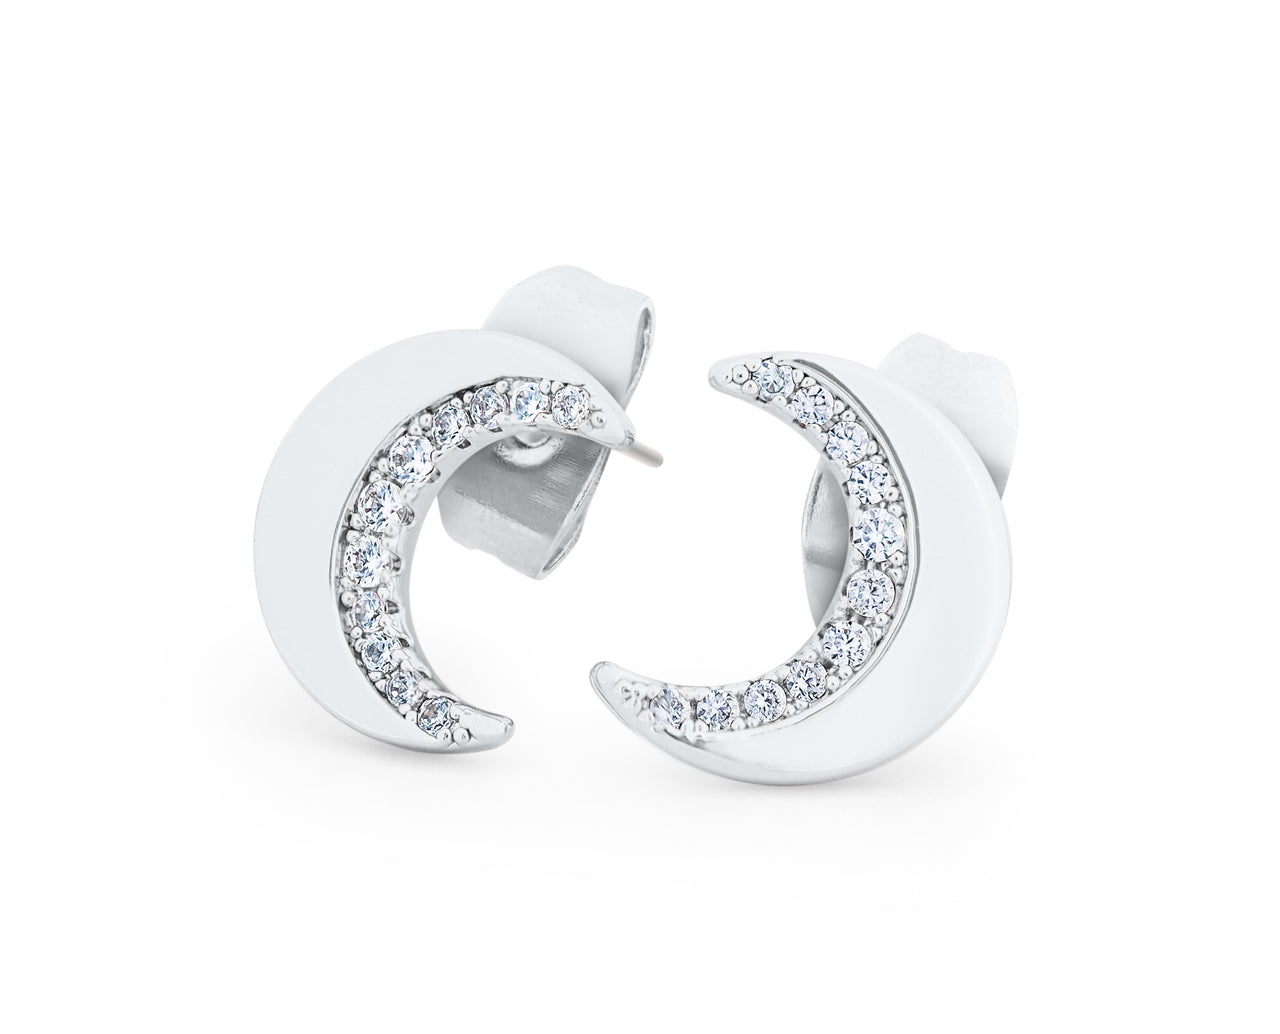 Tipperary Crystal Earrings - Moon Collection - Half Moon with Clear Stones